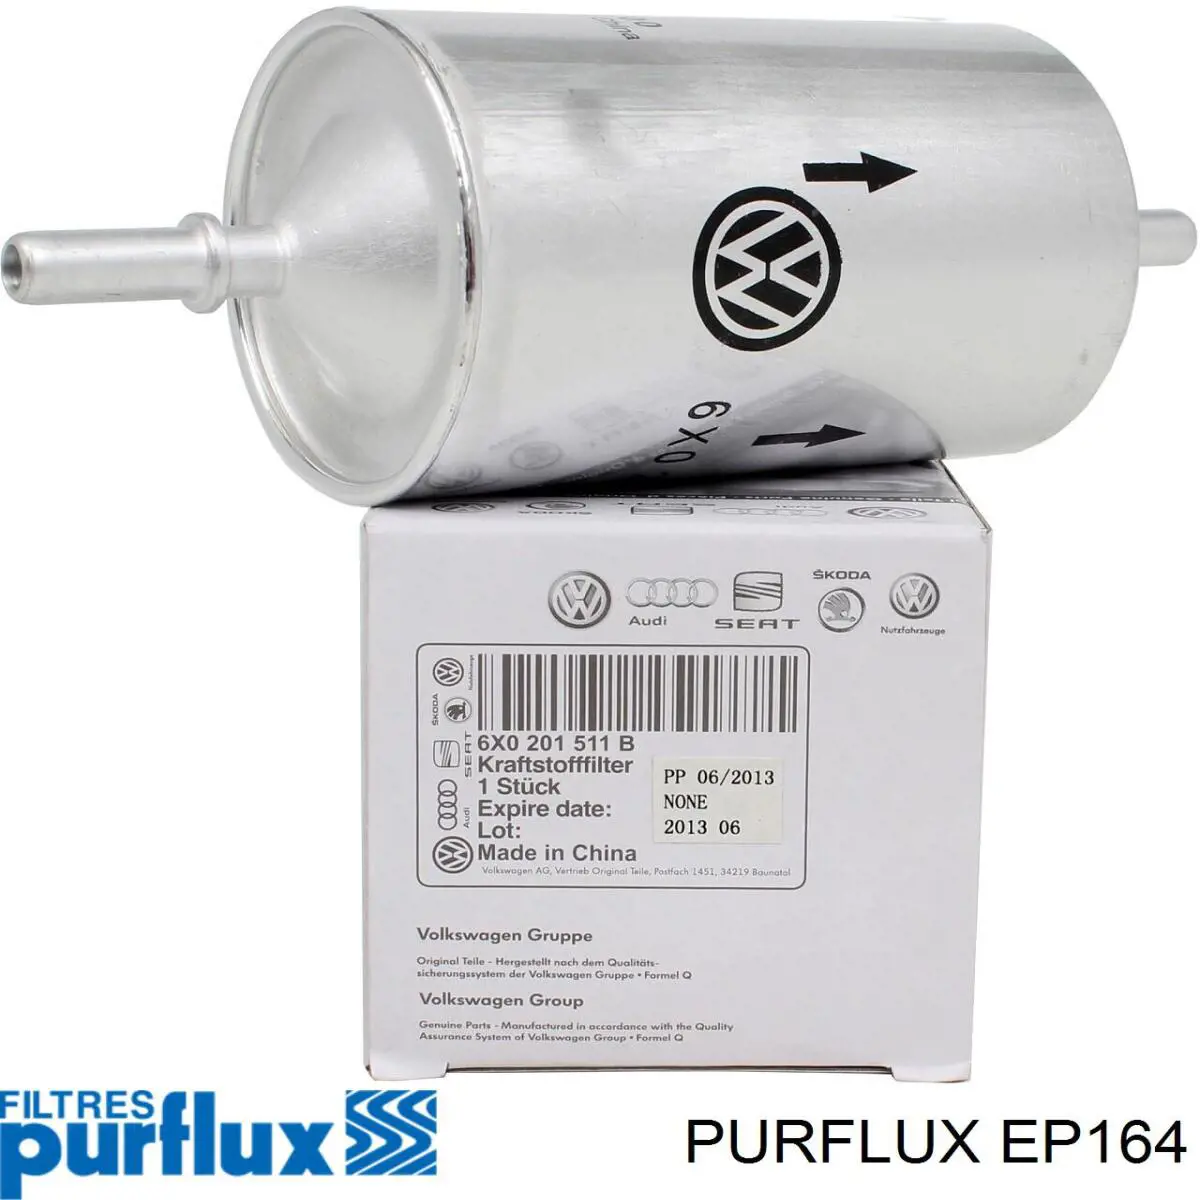 EP164 Purflux filtro combustible